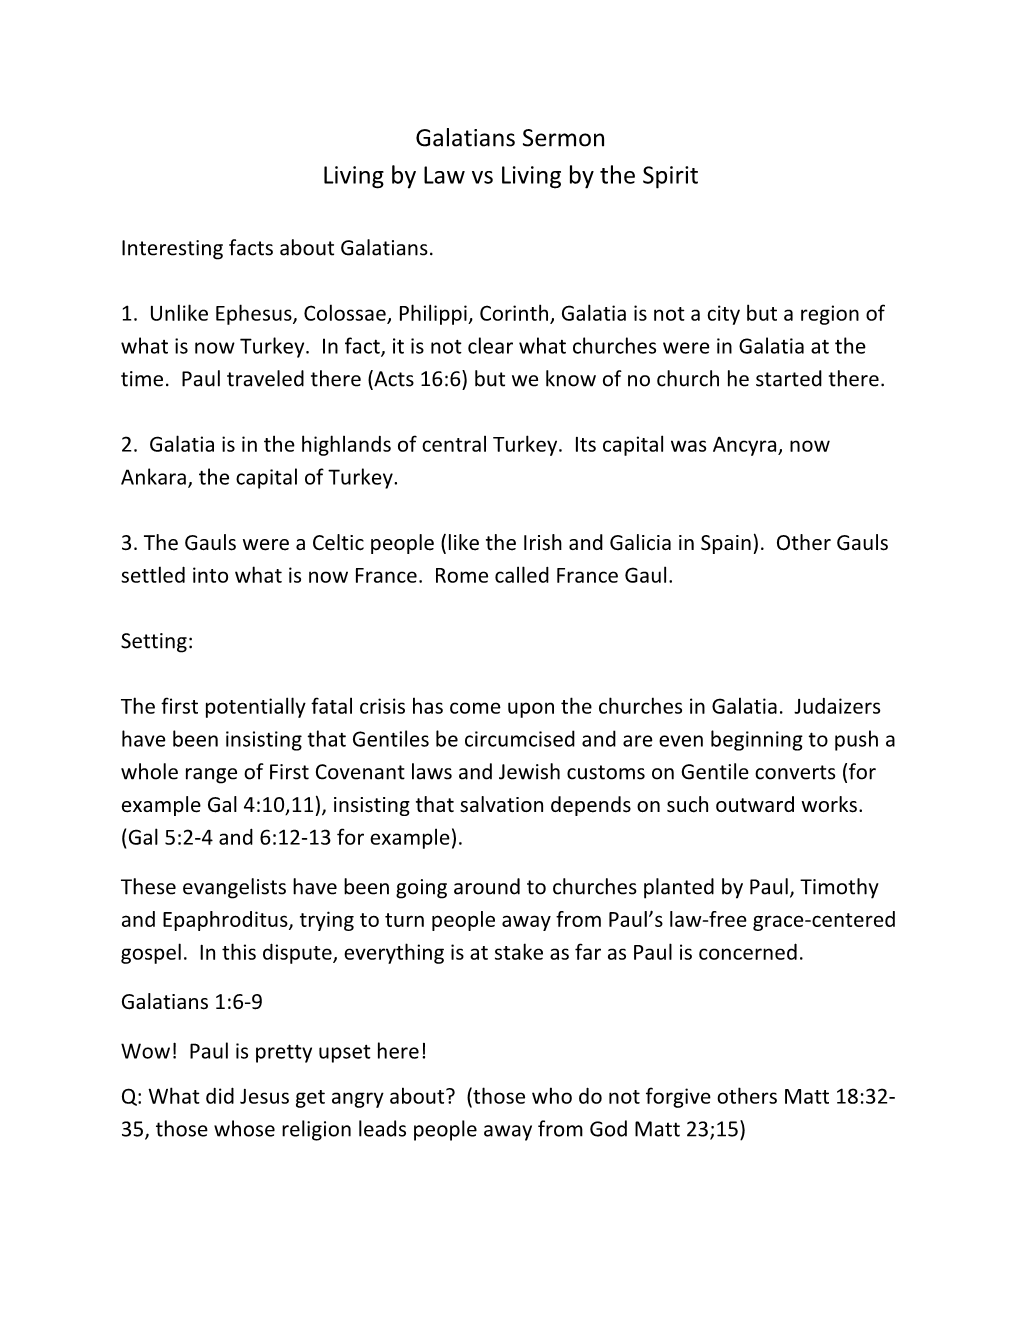 Living by Law Vs Living by the Spirit